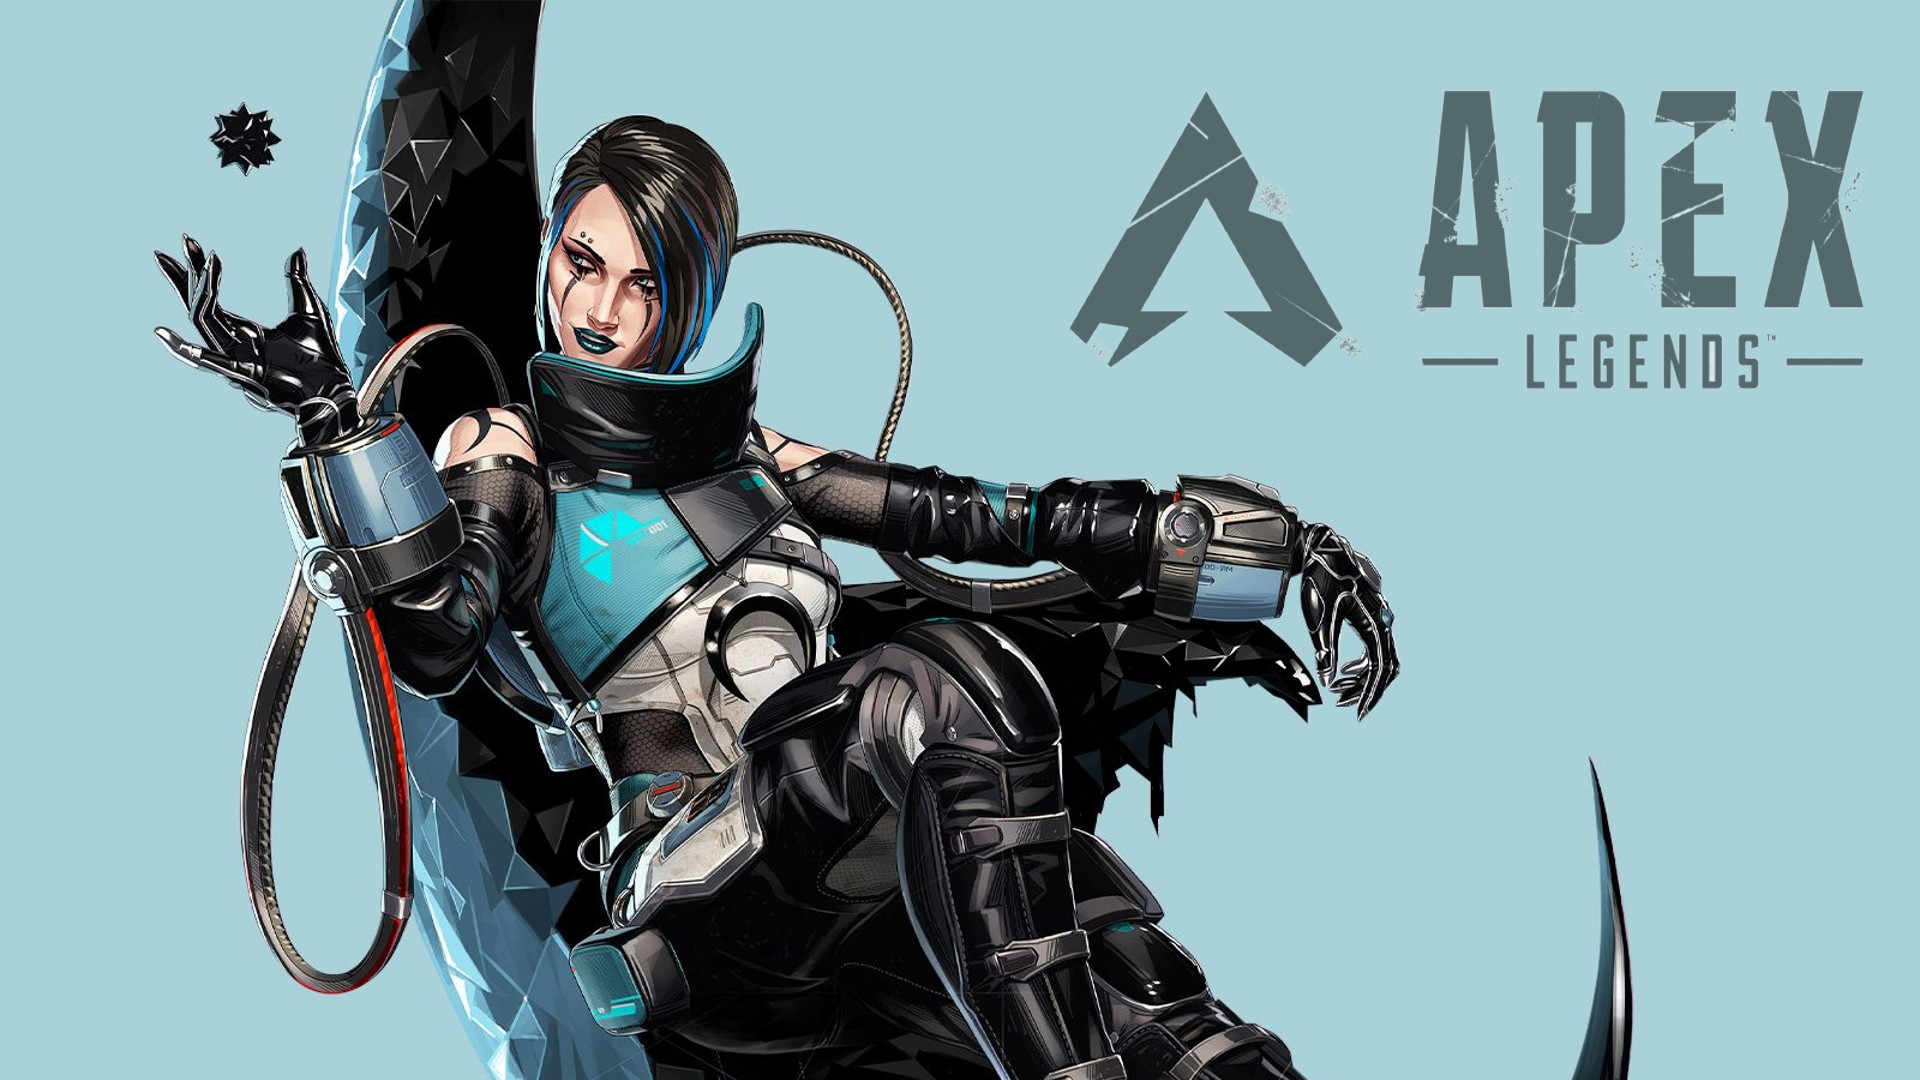 Catalyst is the new Legend in Apex Legends Season 15: Eclipse